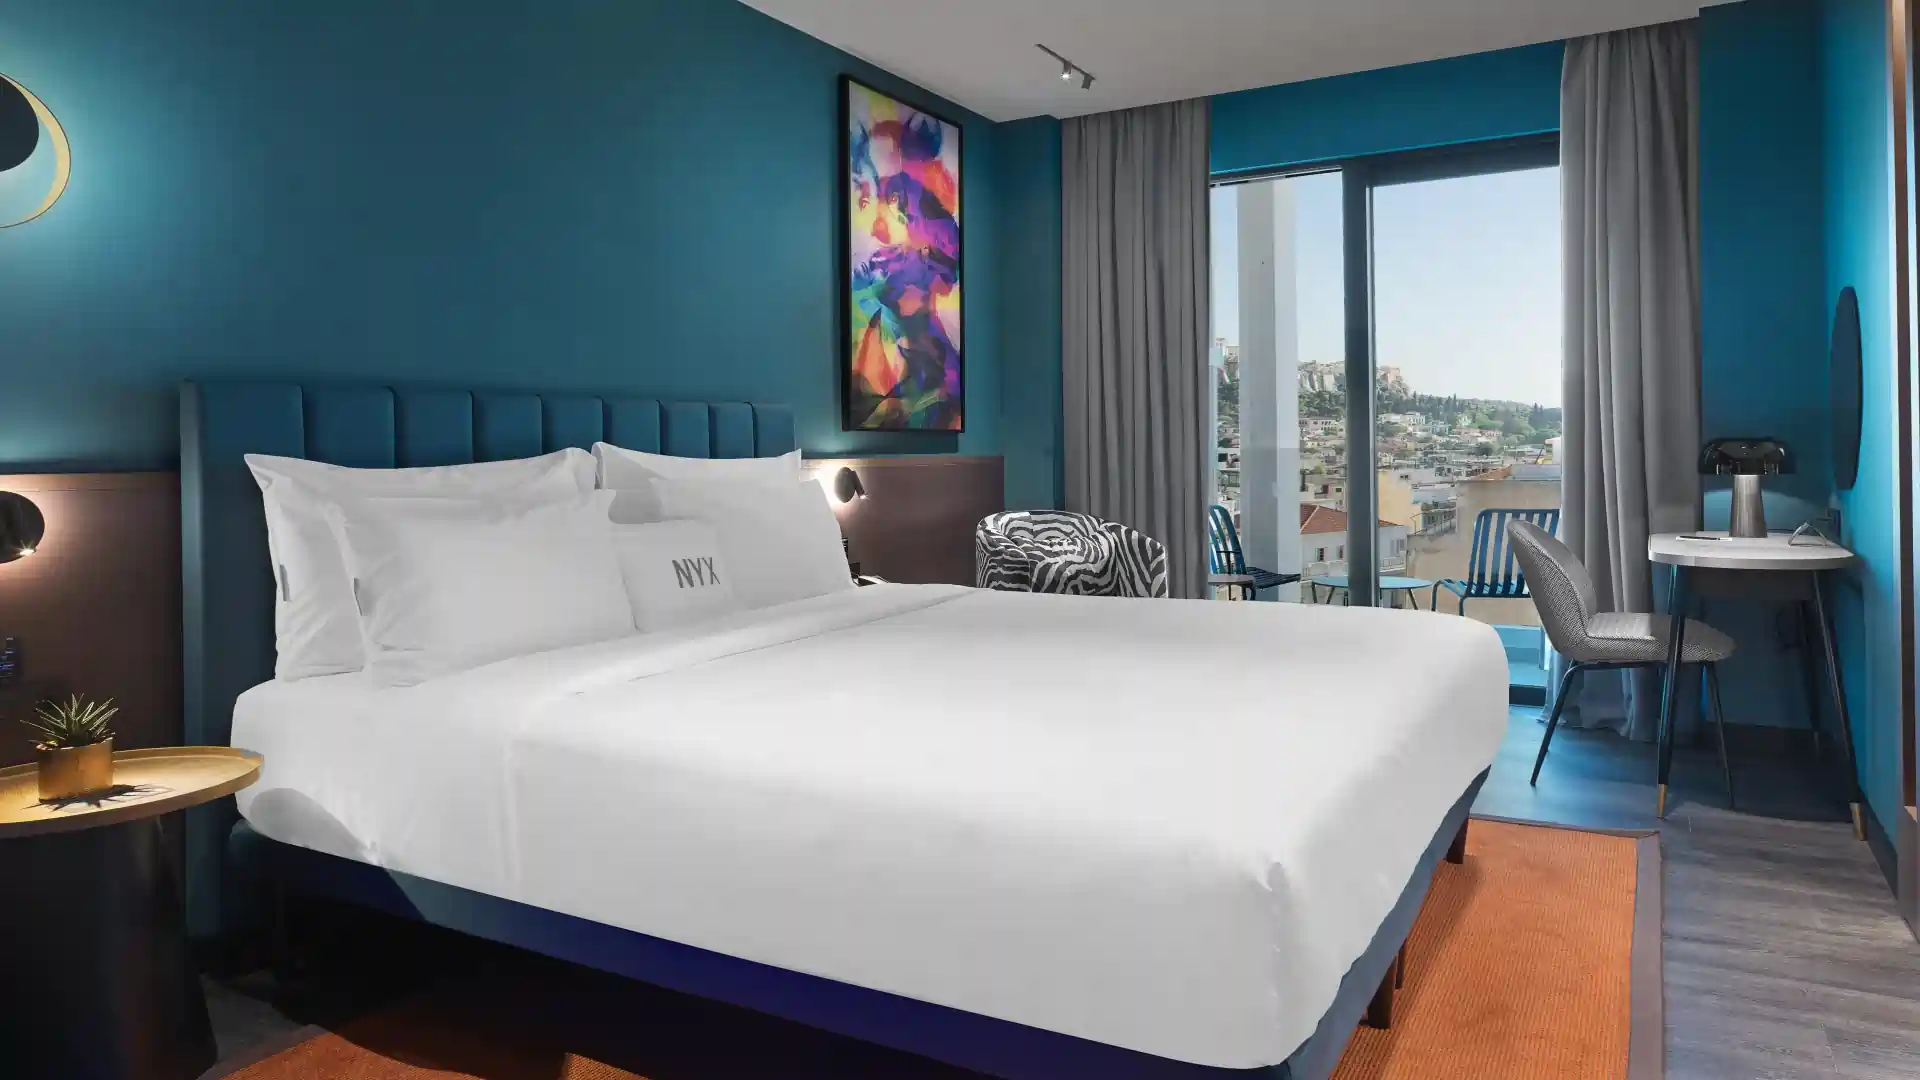 Deluxe Space Room With Acropolis View